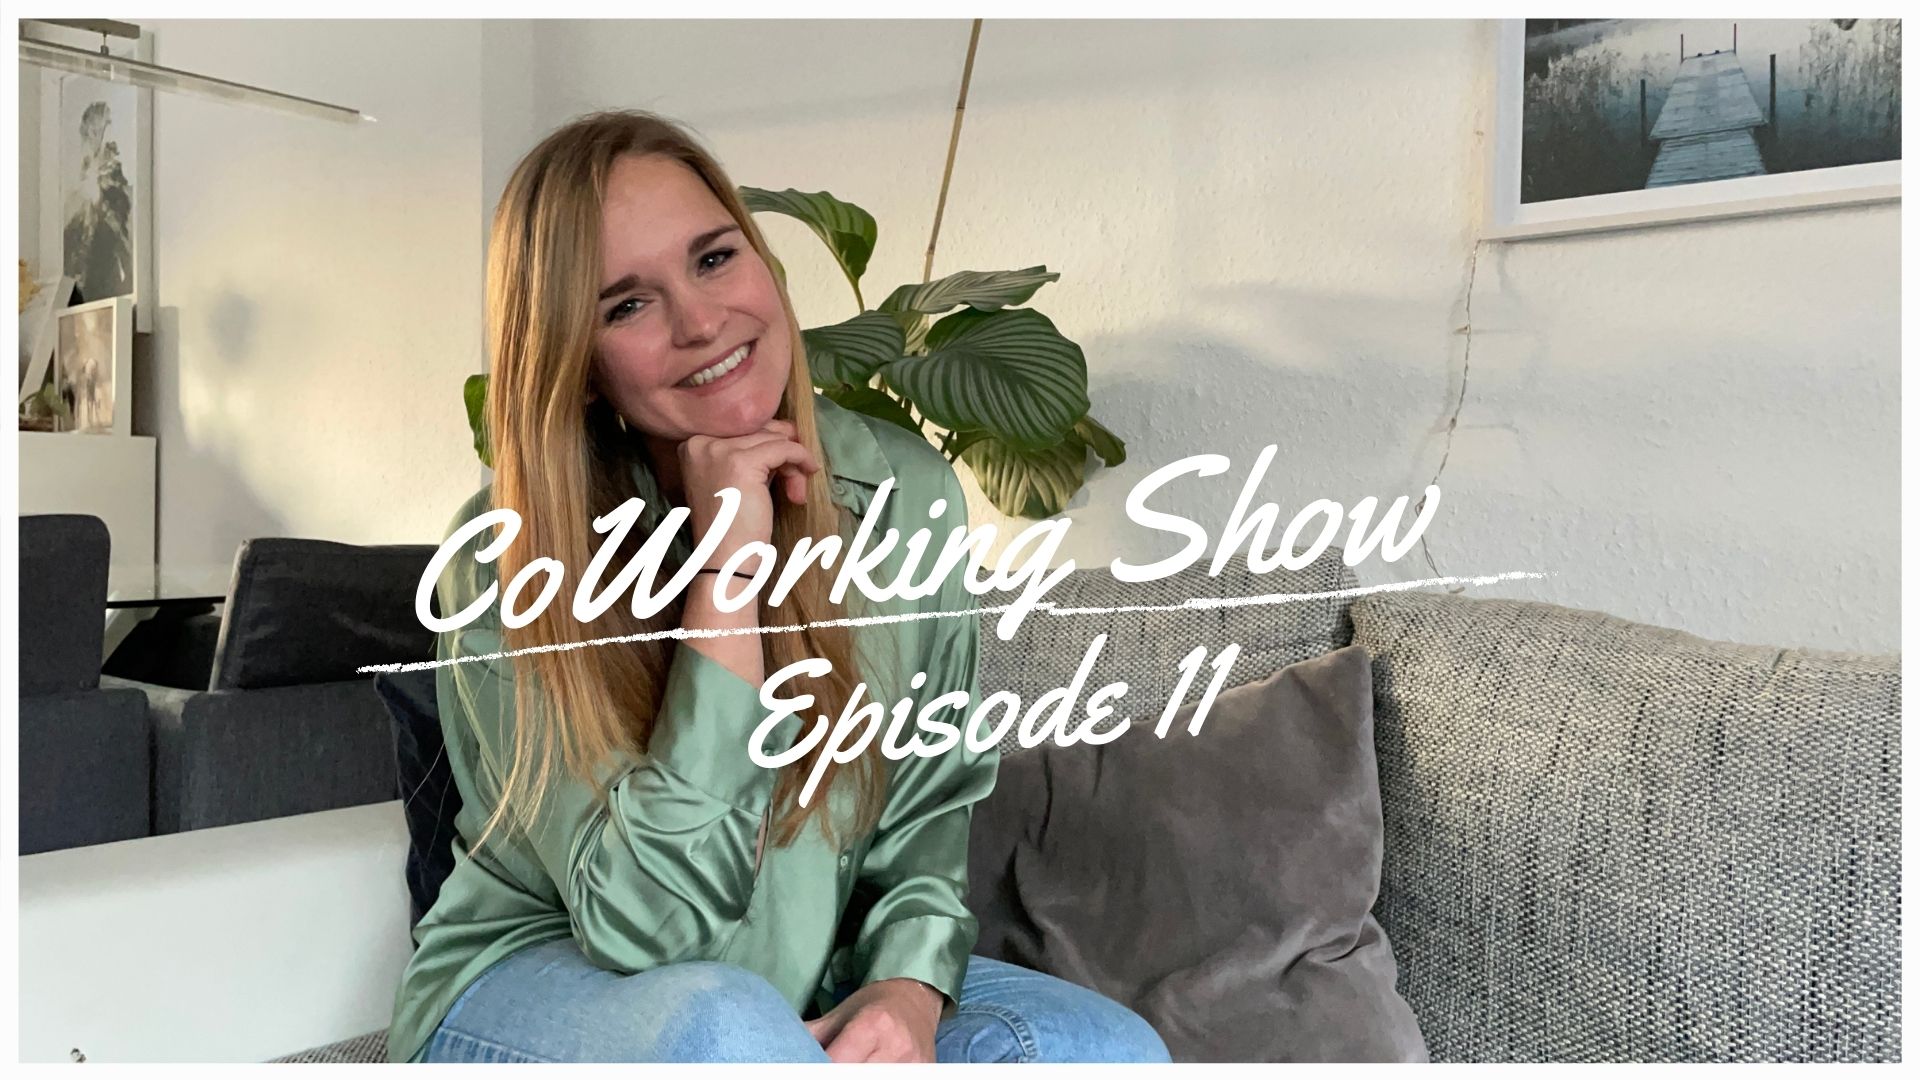 What to Discuss With Your TripMates Before Going on a Trip | CoWorking Show